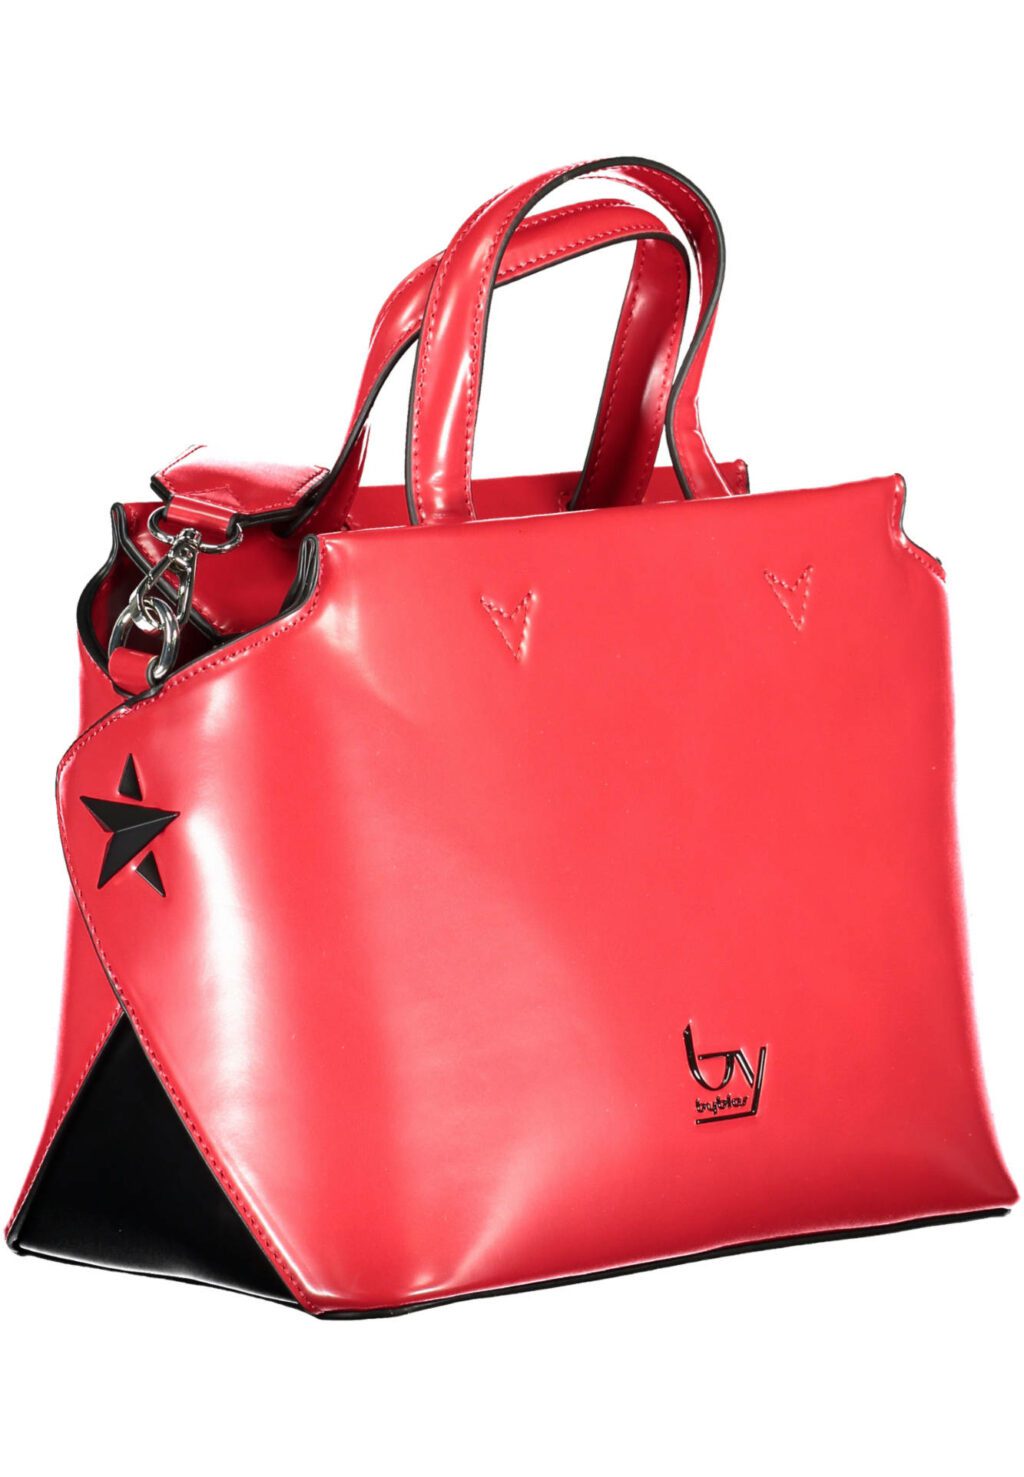 BYBLOS RED WOMEN'S BAG 20100096_ROSSO_4189-CHERRY